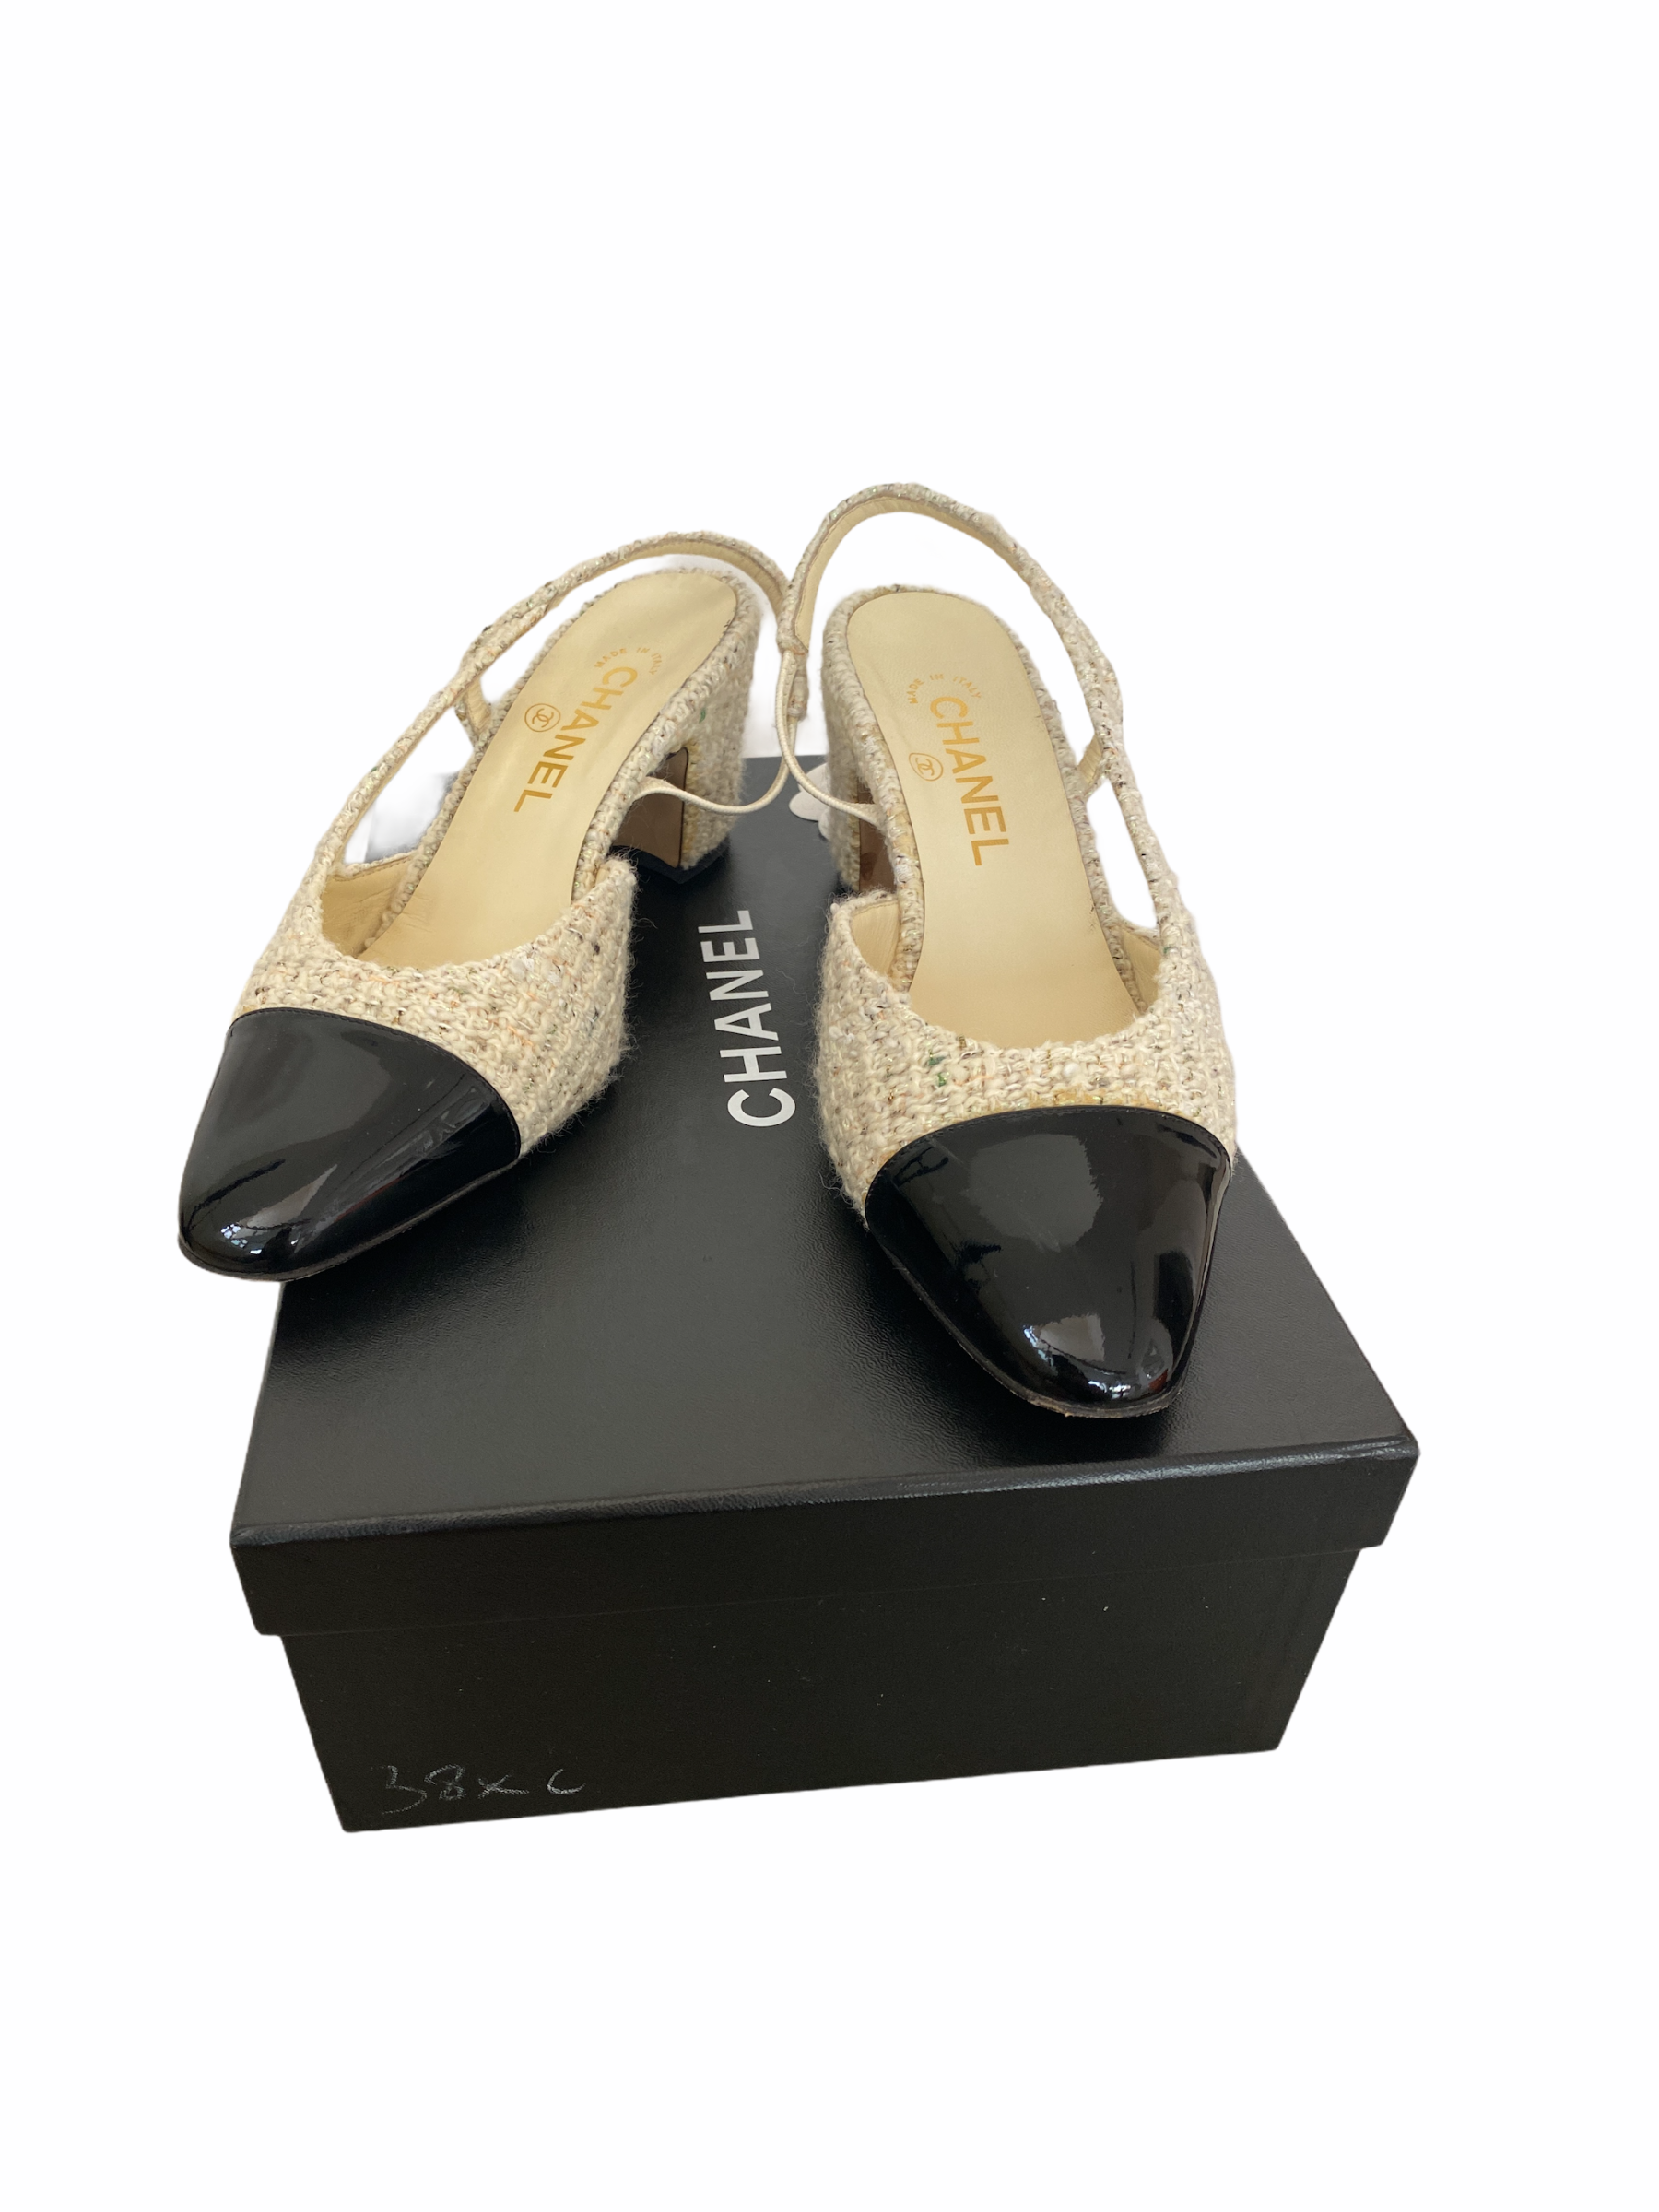 chanel slingback shoes for women 8 wide